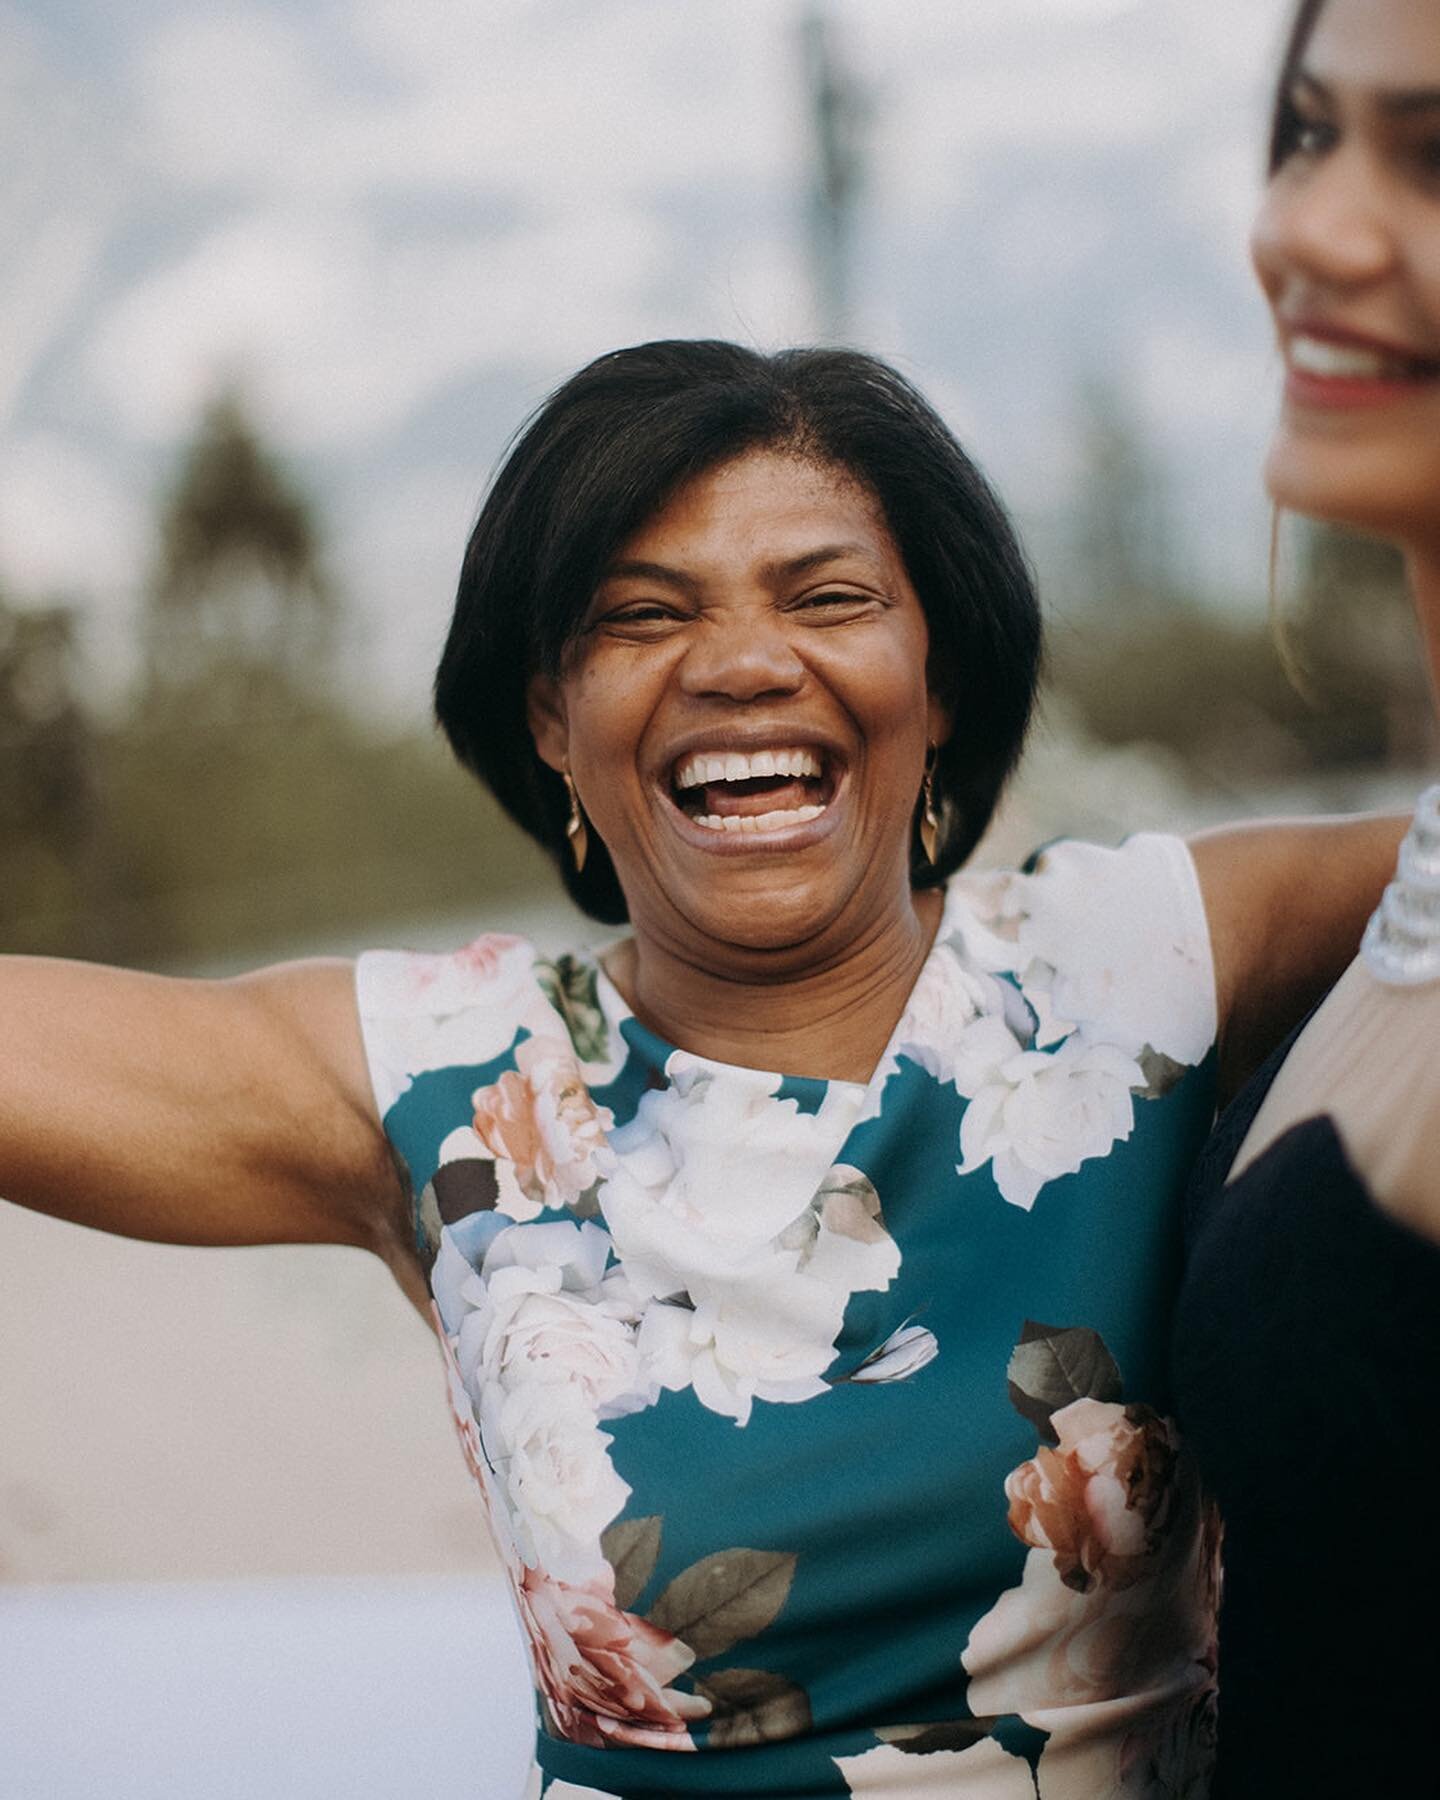 Give me all the JOYFUL moments 😂🙌🏾📸 always a highlight when good friends get married 🔥 stay tuned to see the couple soon 😏
.
.
.
.
#outdoorwedding #modernbride #weddinginspirationswitzerland  #alpsweddingphotographer #alpswedding #bernhochzeits